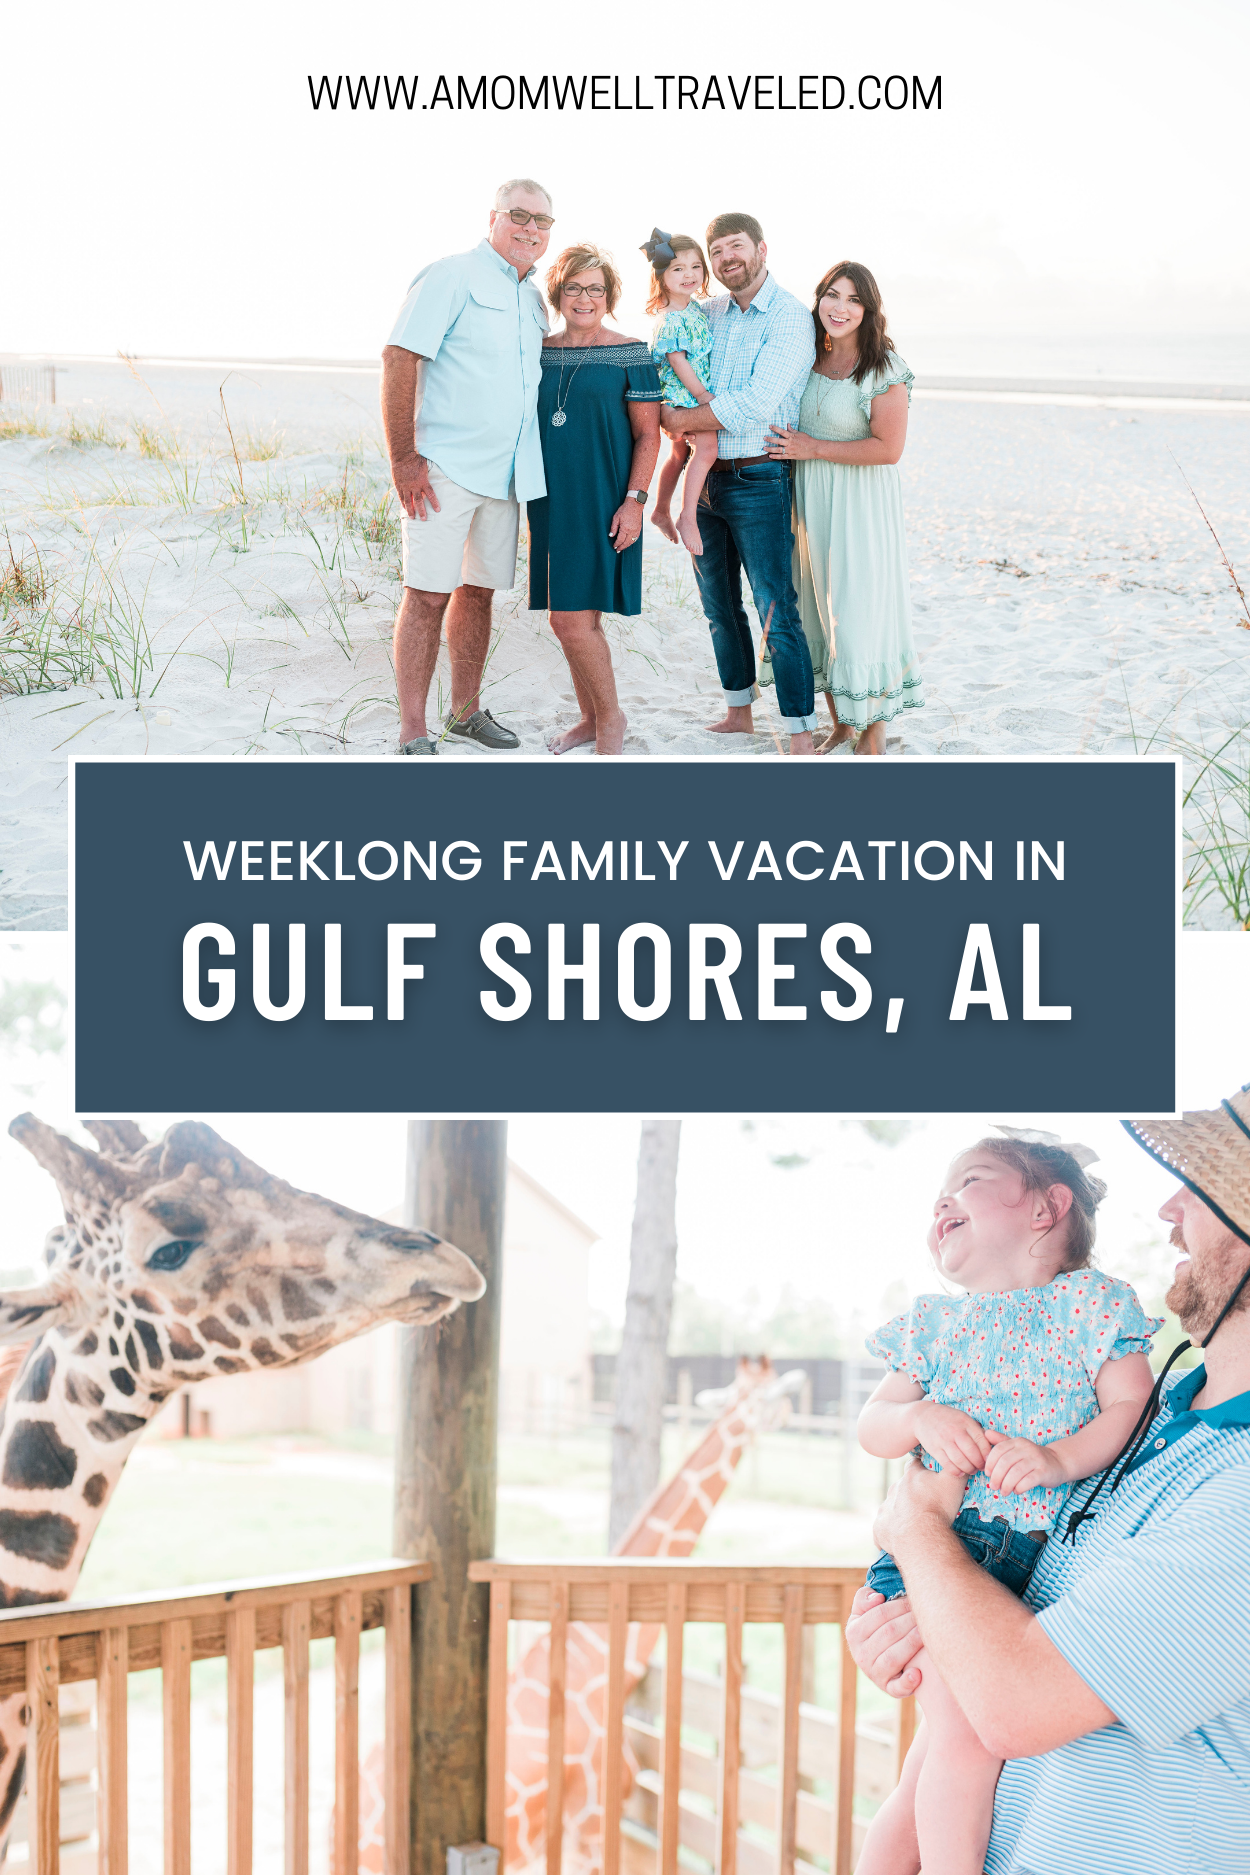 Family vacation in gulf shores, Alabama